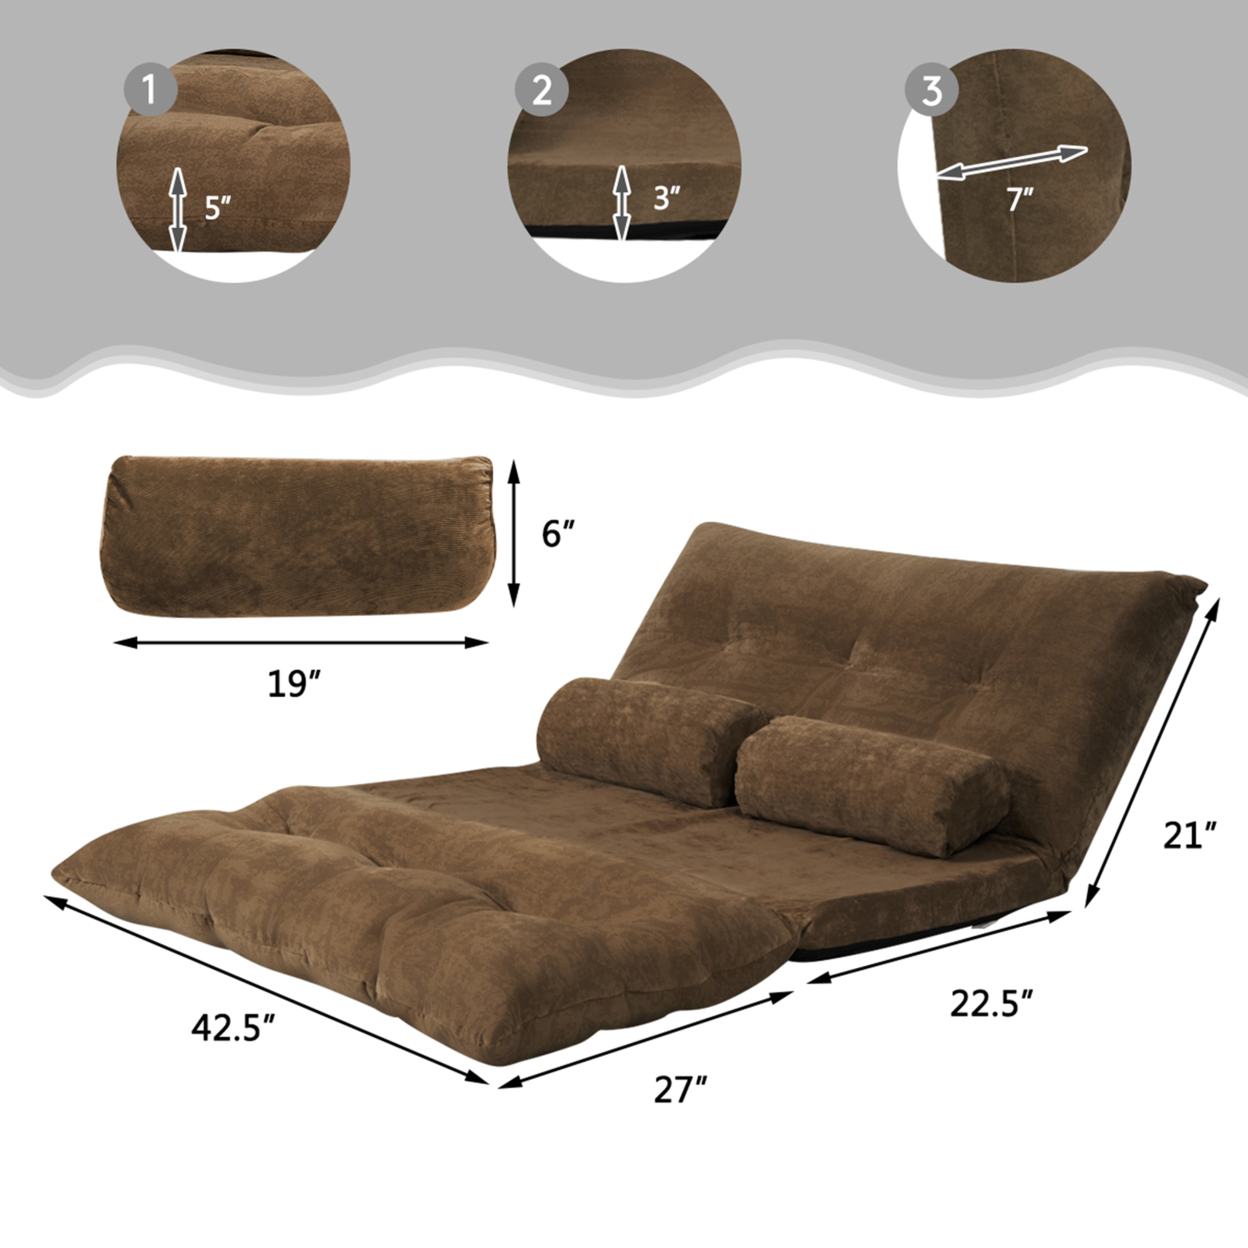 Floor Sofa Bed 6-Position Adjustable Sleeper Lounge Couch With 2 Pillows - Coffee